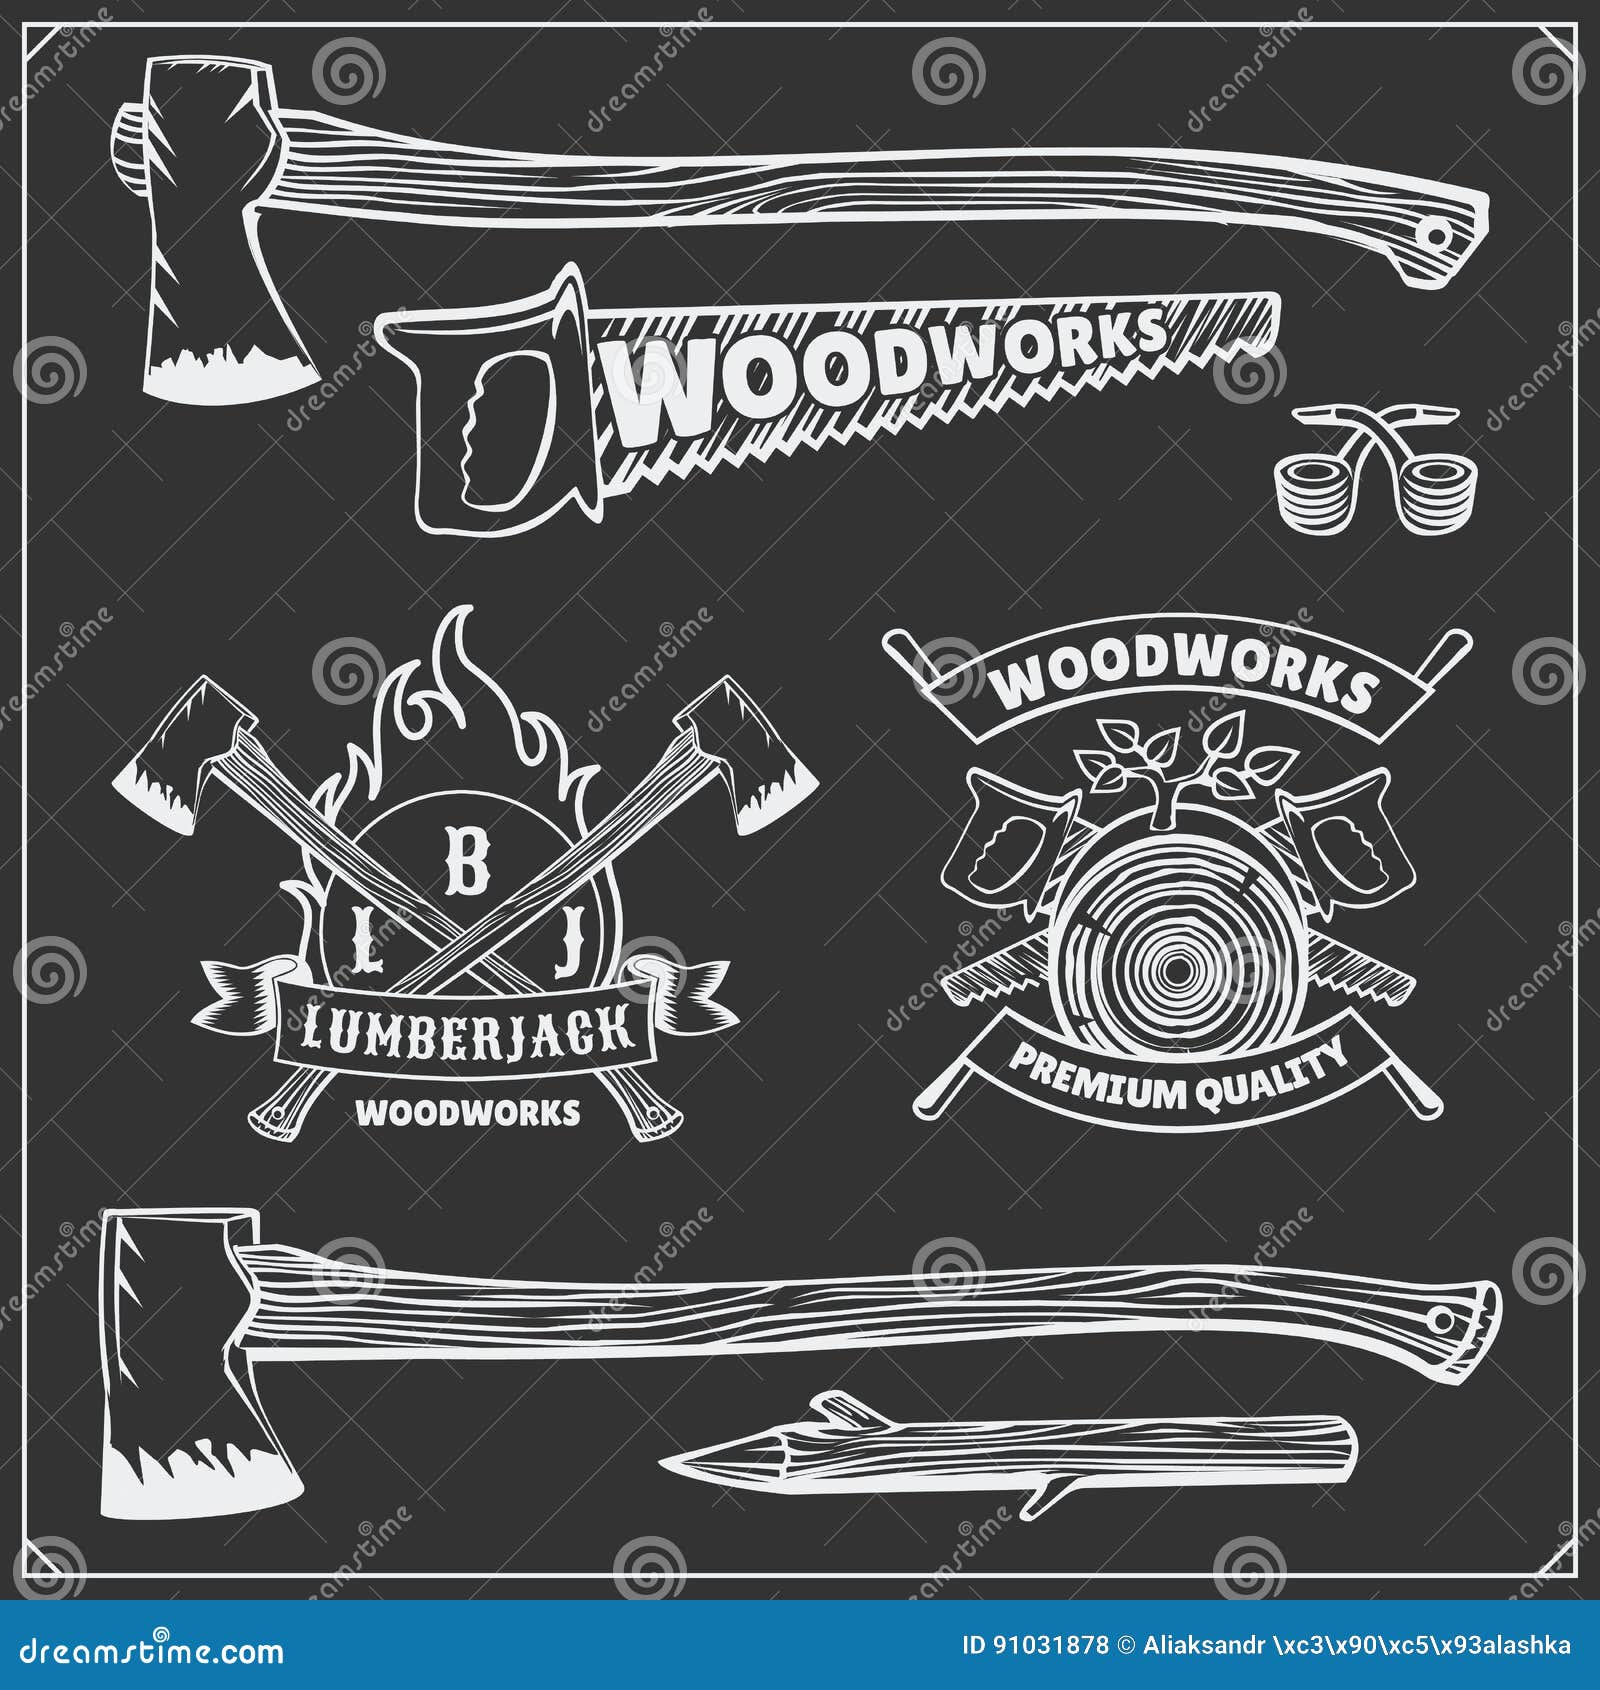  set of vintage lumberjack logos, labels, emblems and  s. axes and saws.